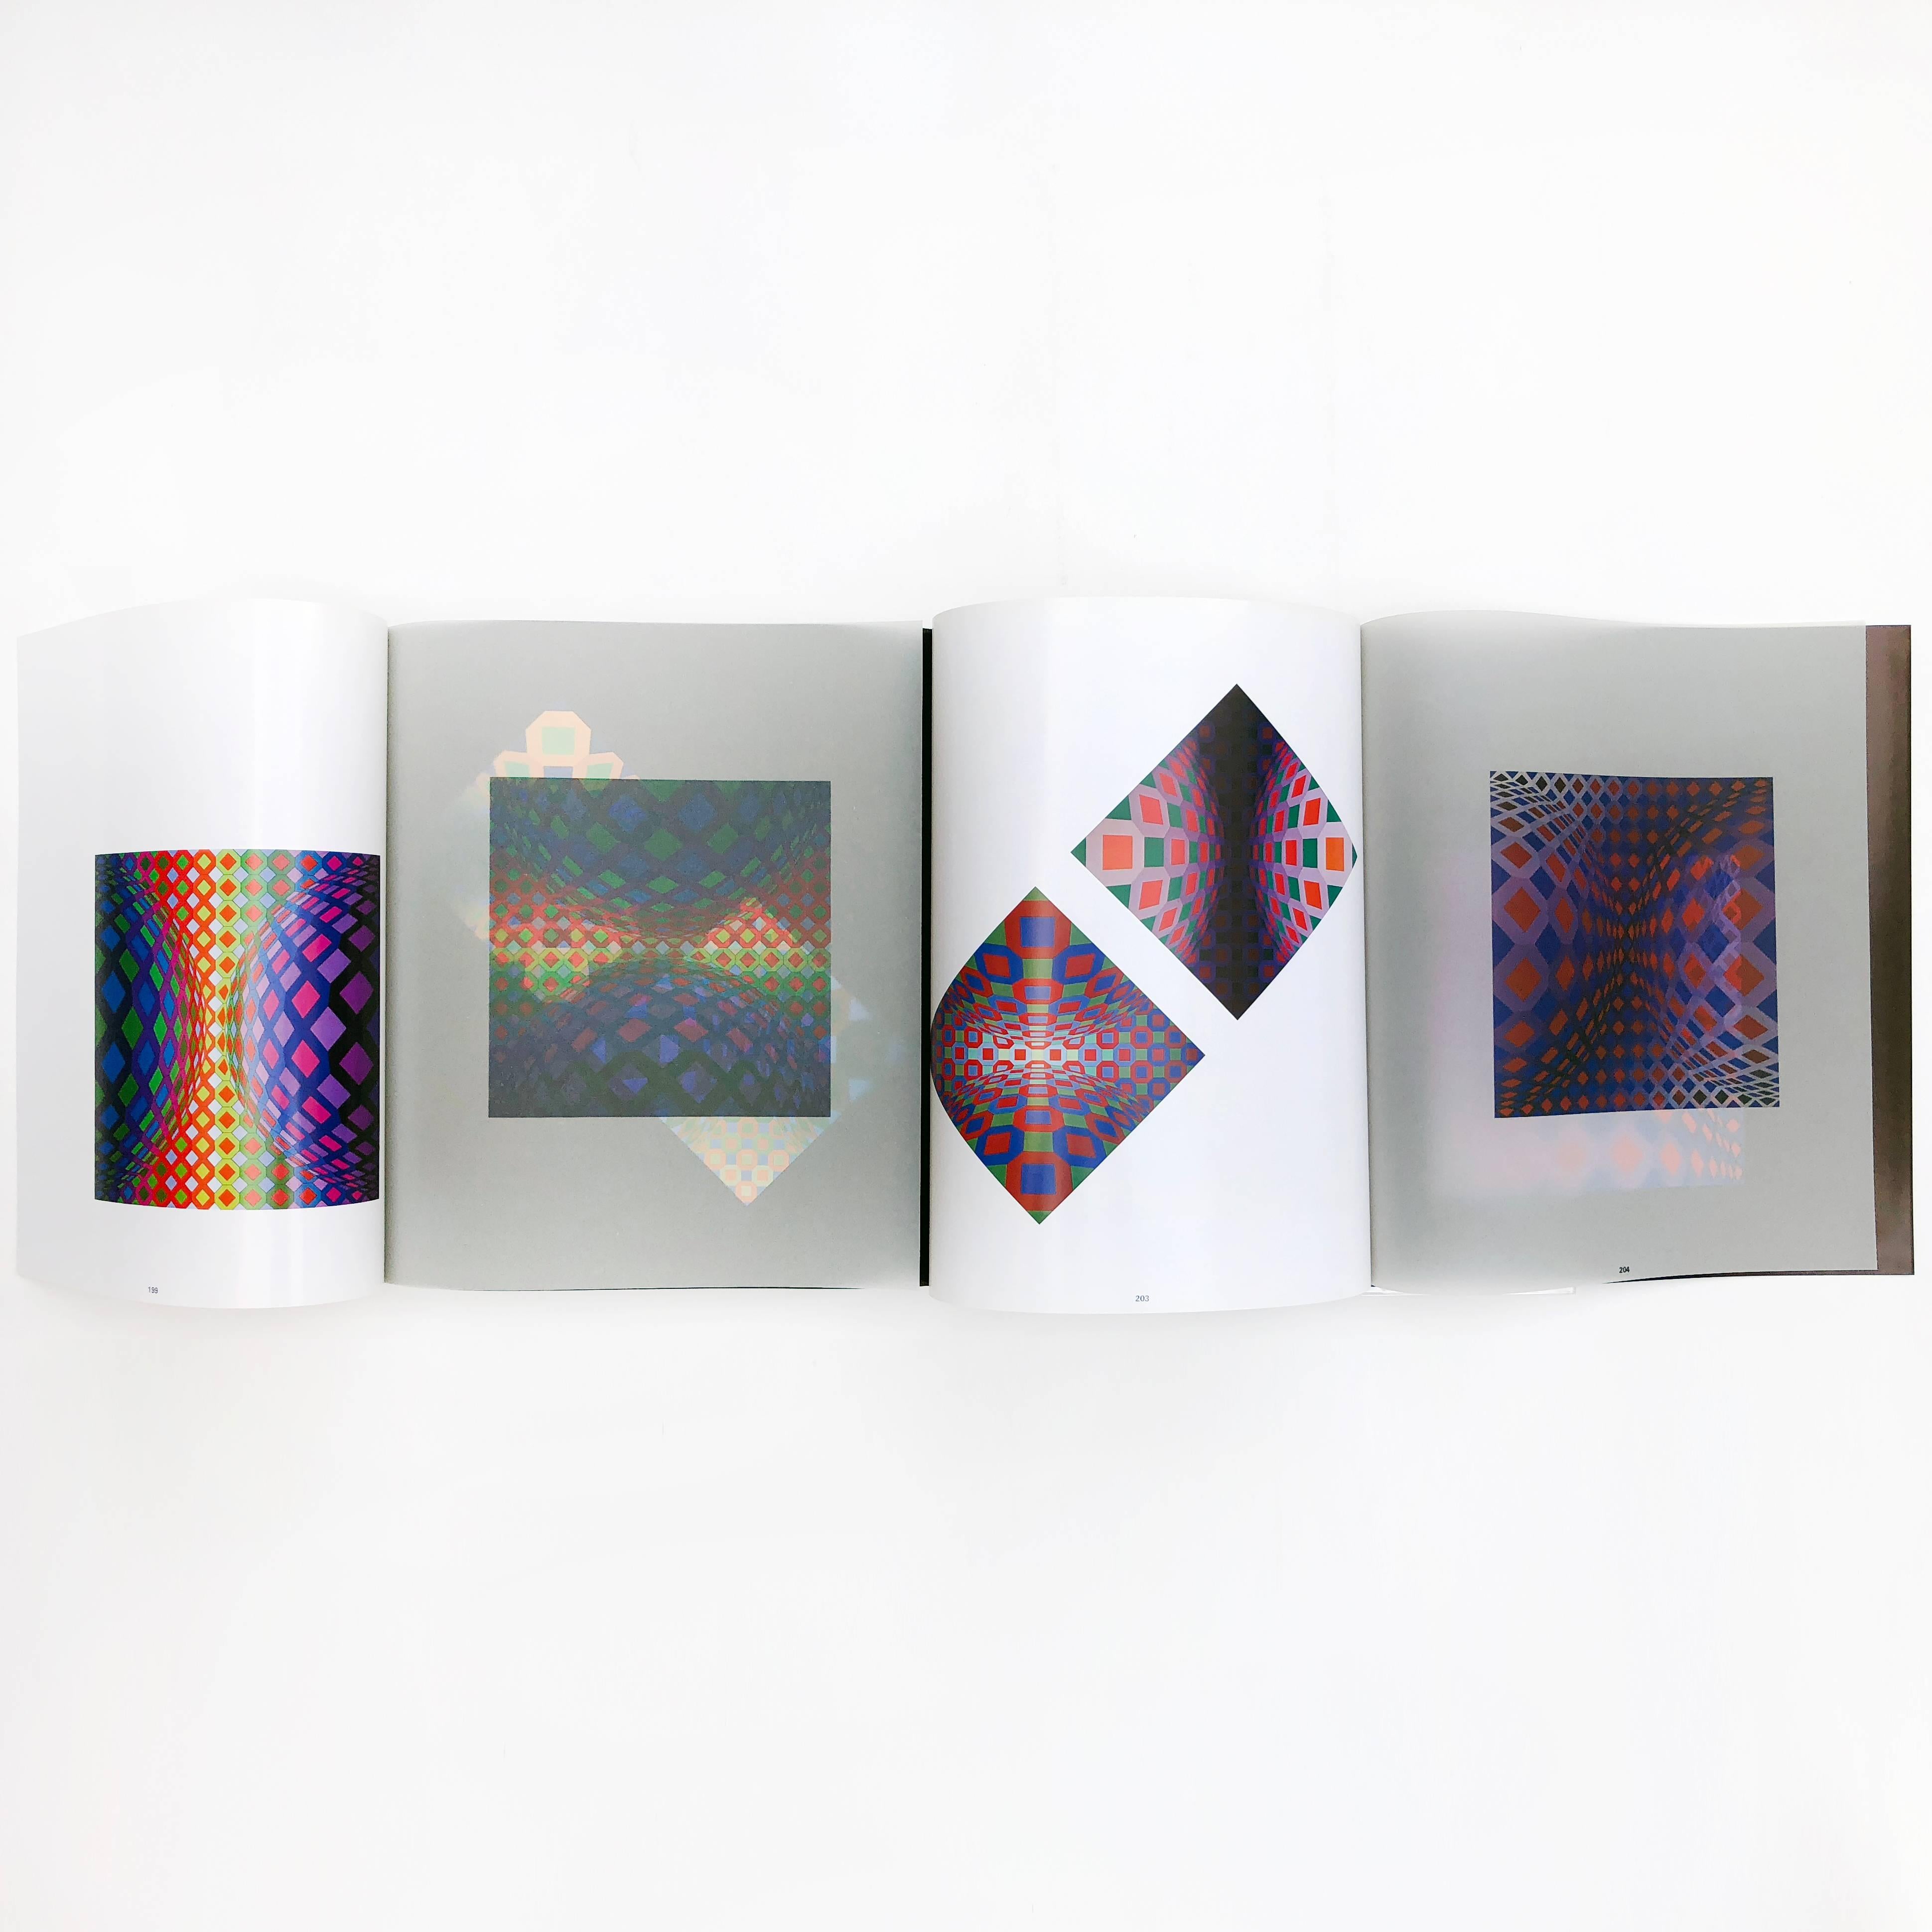 First edition, published by Editions du Griffin, 1974

This edition stands out from other artists’ monographs, putting the book format at the forefront of the experience. Vasarely designed transparent, colored and fold old pages as a unique ground